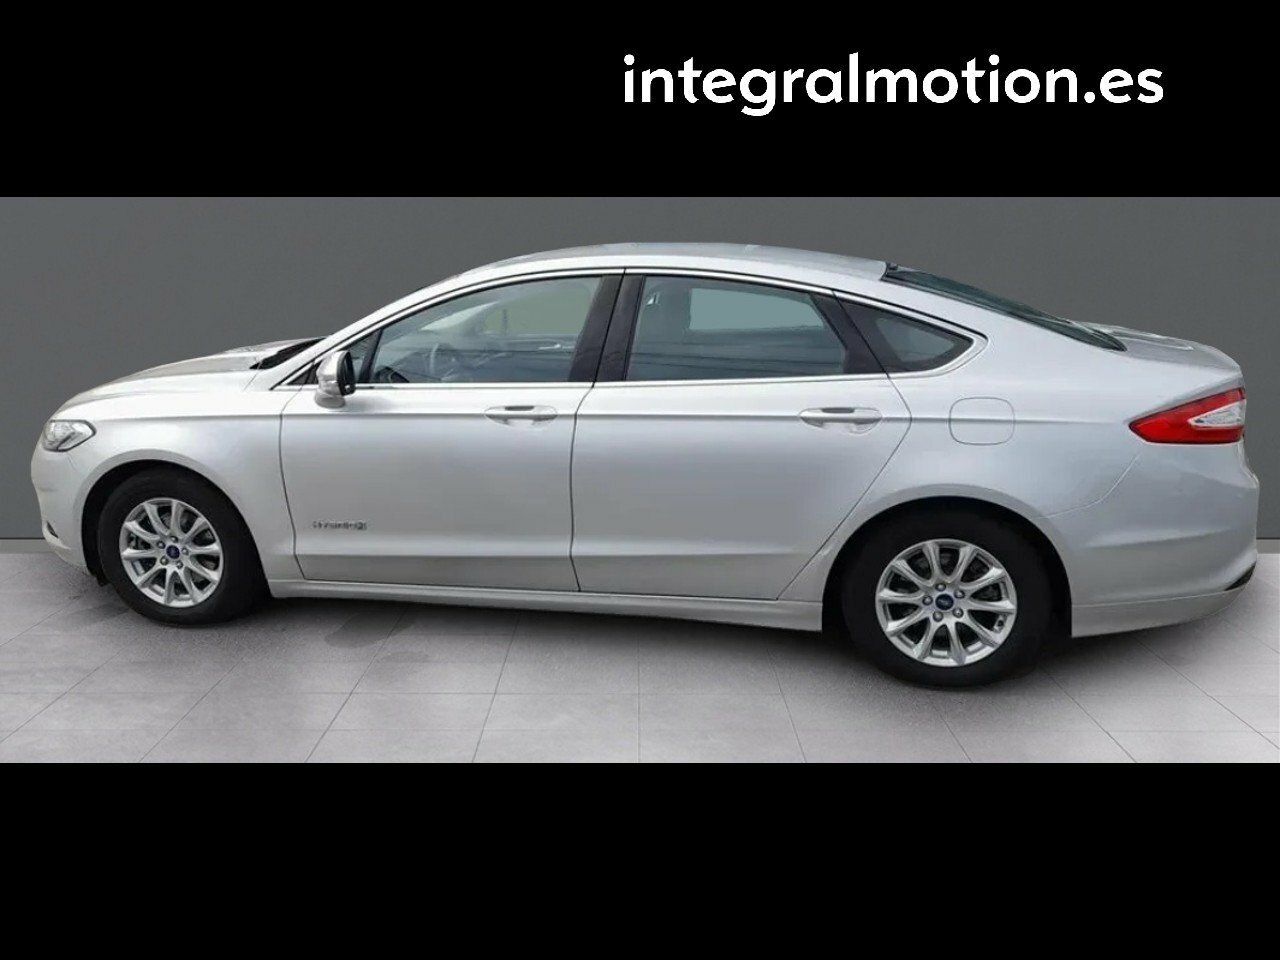 Foto Ford Mondeo 5